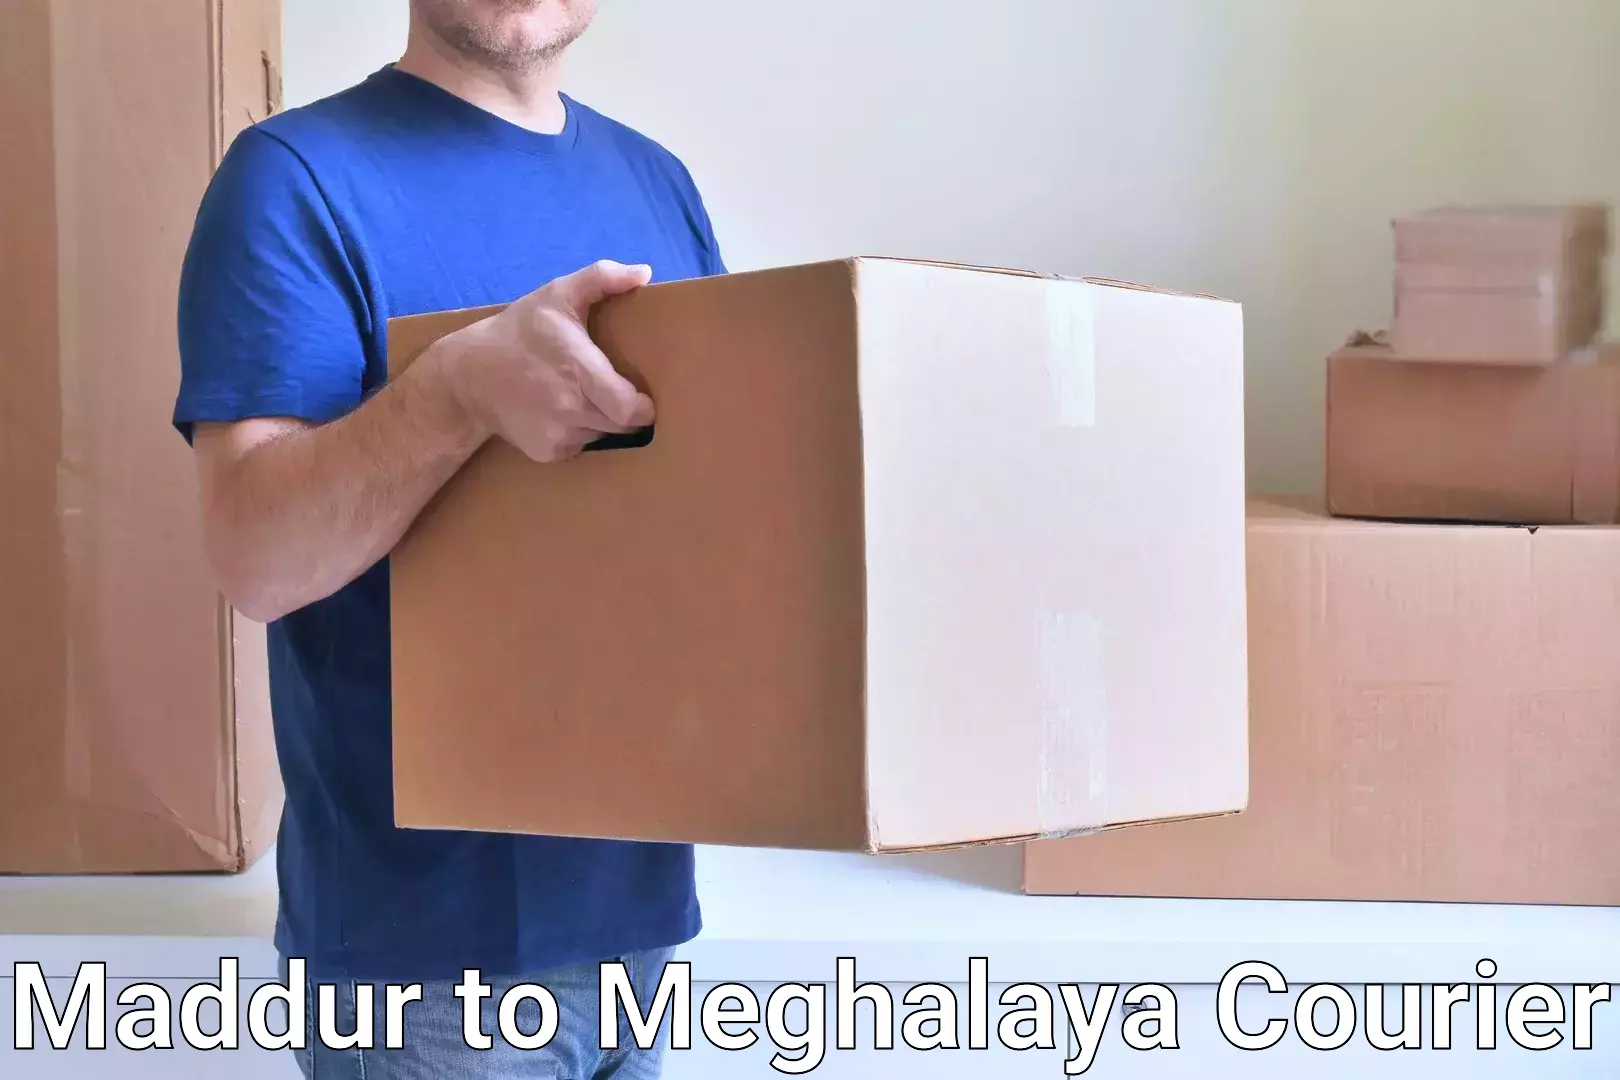 Efficient package consolidation Maddur to Shillong